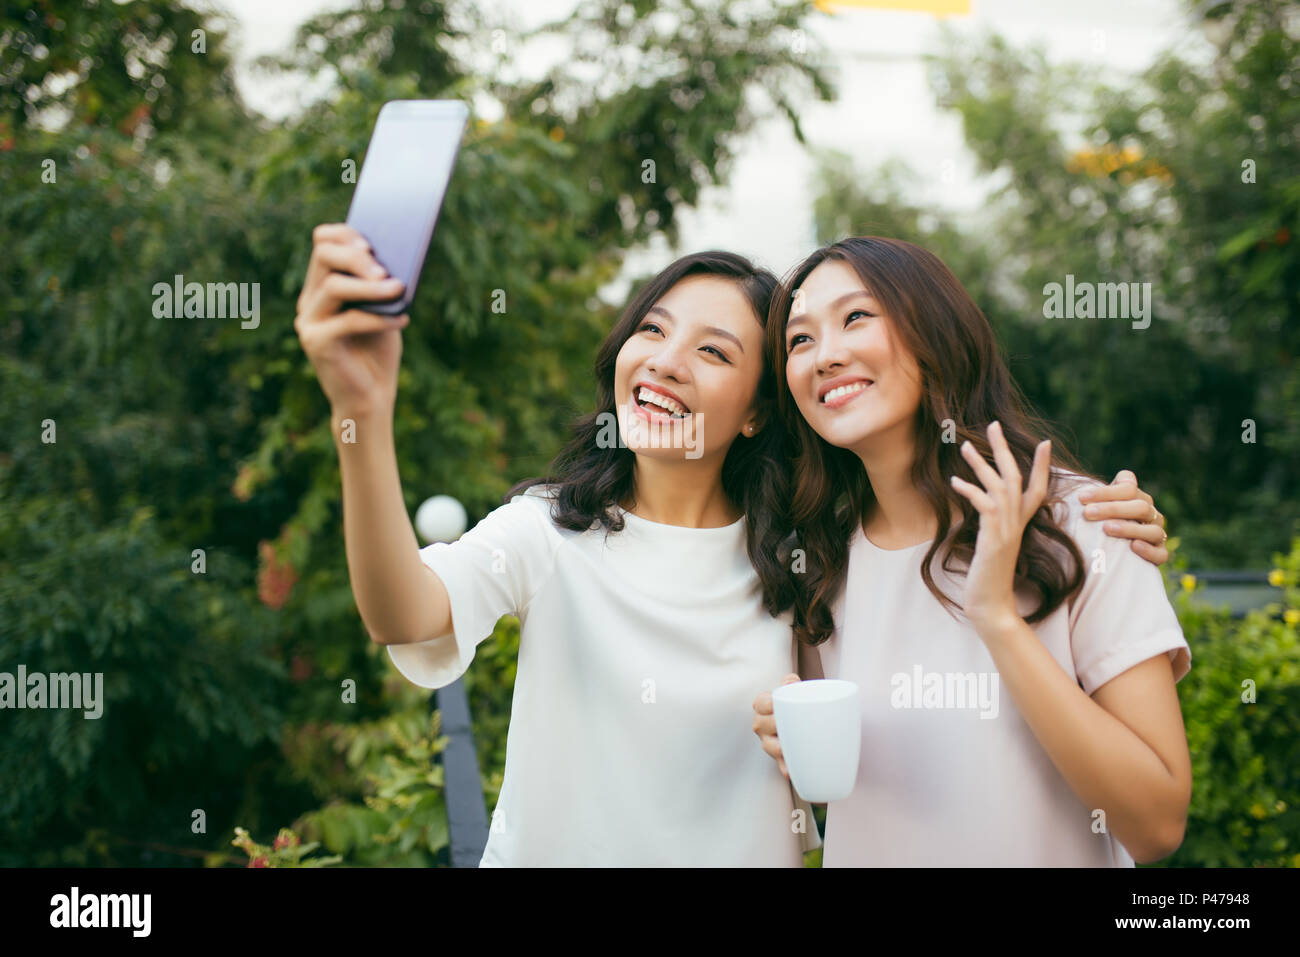 Lifestyle of Two beautiful Happiness Long Hair Women are  Using Mobile Phone for Selfie in Garden. Asian Female Models Portrait Concept. Stock Photo